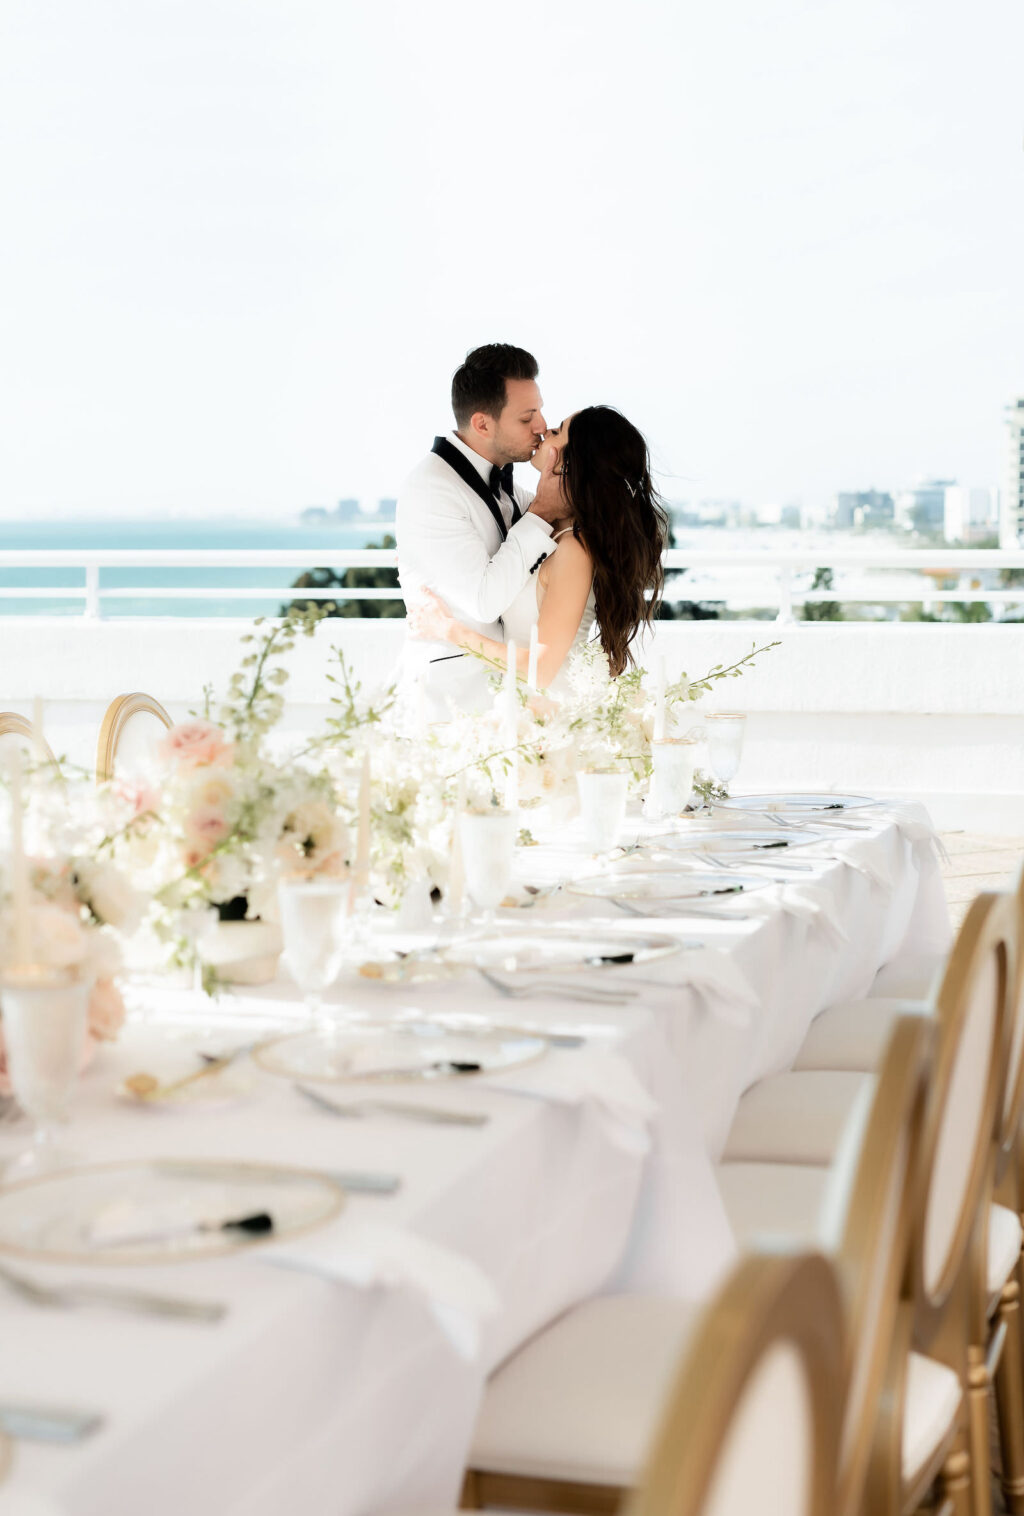 Classic Elegant Bride and Groom in White Tuxedo with Black Bowtie Standing at Wedding Reception Table with Elegant Ivory and Gold Dining Chairs, Low Floral Centerpieces, Rooftop Waterfront St.Pete Historic Wedding Venue The Don CeSar Hotel | Tampa Bay Wedding Planner Elegant Affairs by Design | Wedding Rentals Kate Ryan Event Rentals